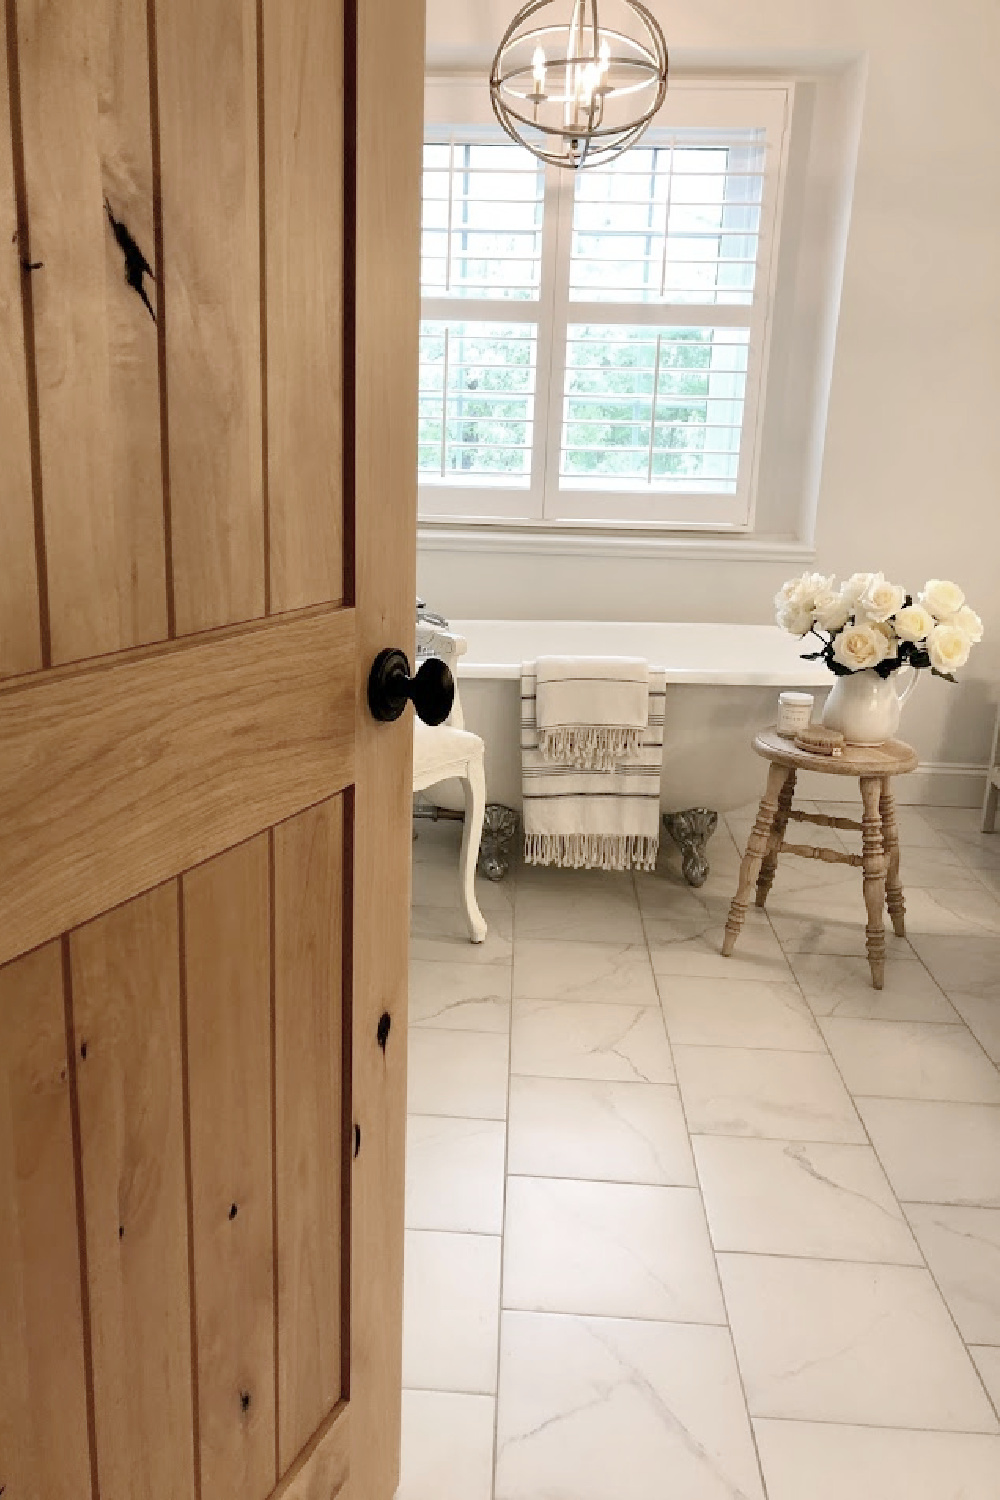 Modern French we renovated from top to bottom with alder door and vintage maid's tub - Hello Lovely Studio #modernfrench